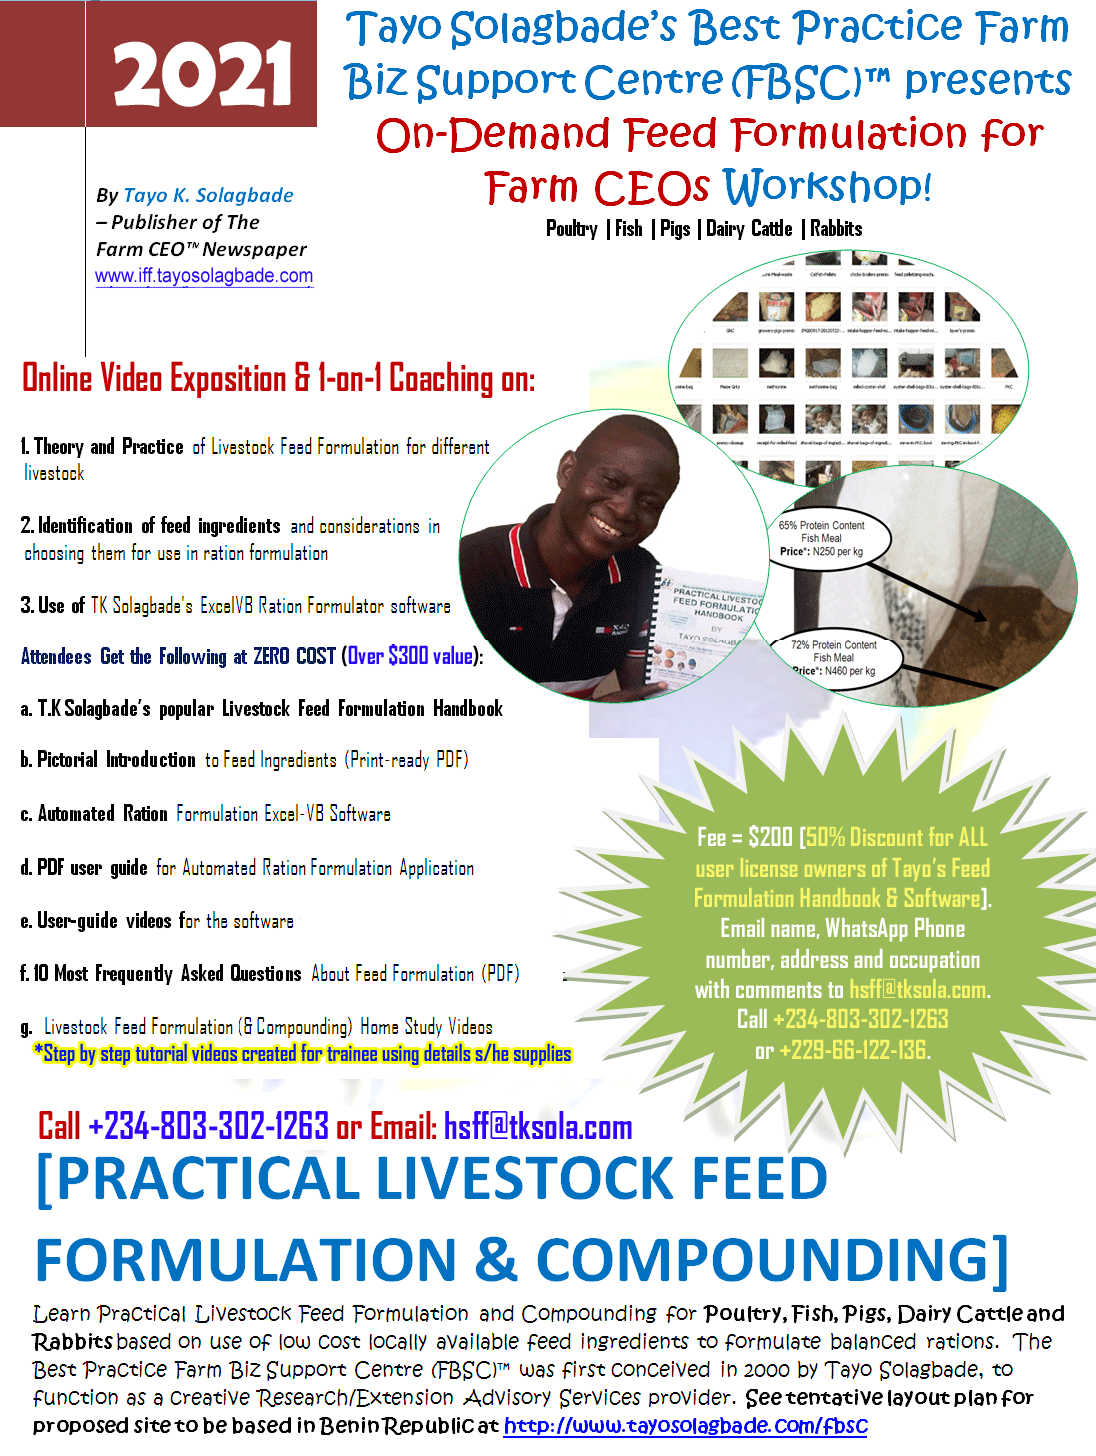 One page flyer for On-Demand Feed Formulation for Farm CEOs Workshop 